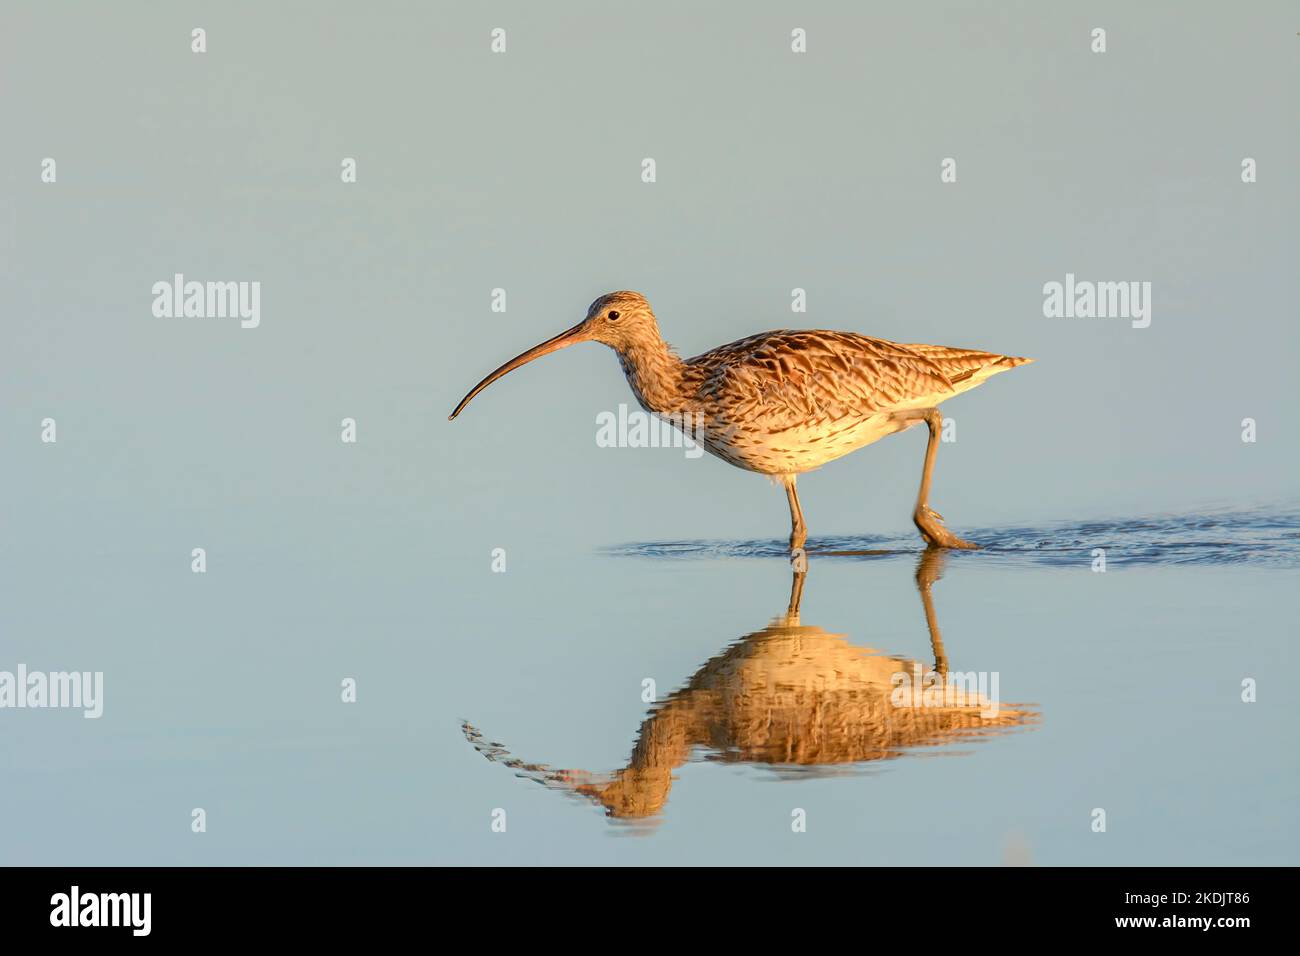 Numenius arquata, curlew, migratory wader bird in the middle of the lake looking for food, at sunset, mallorca balearic islands spain Stock Photo